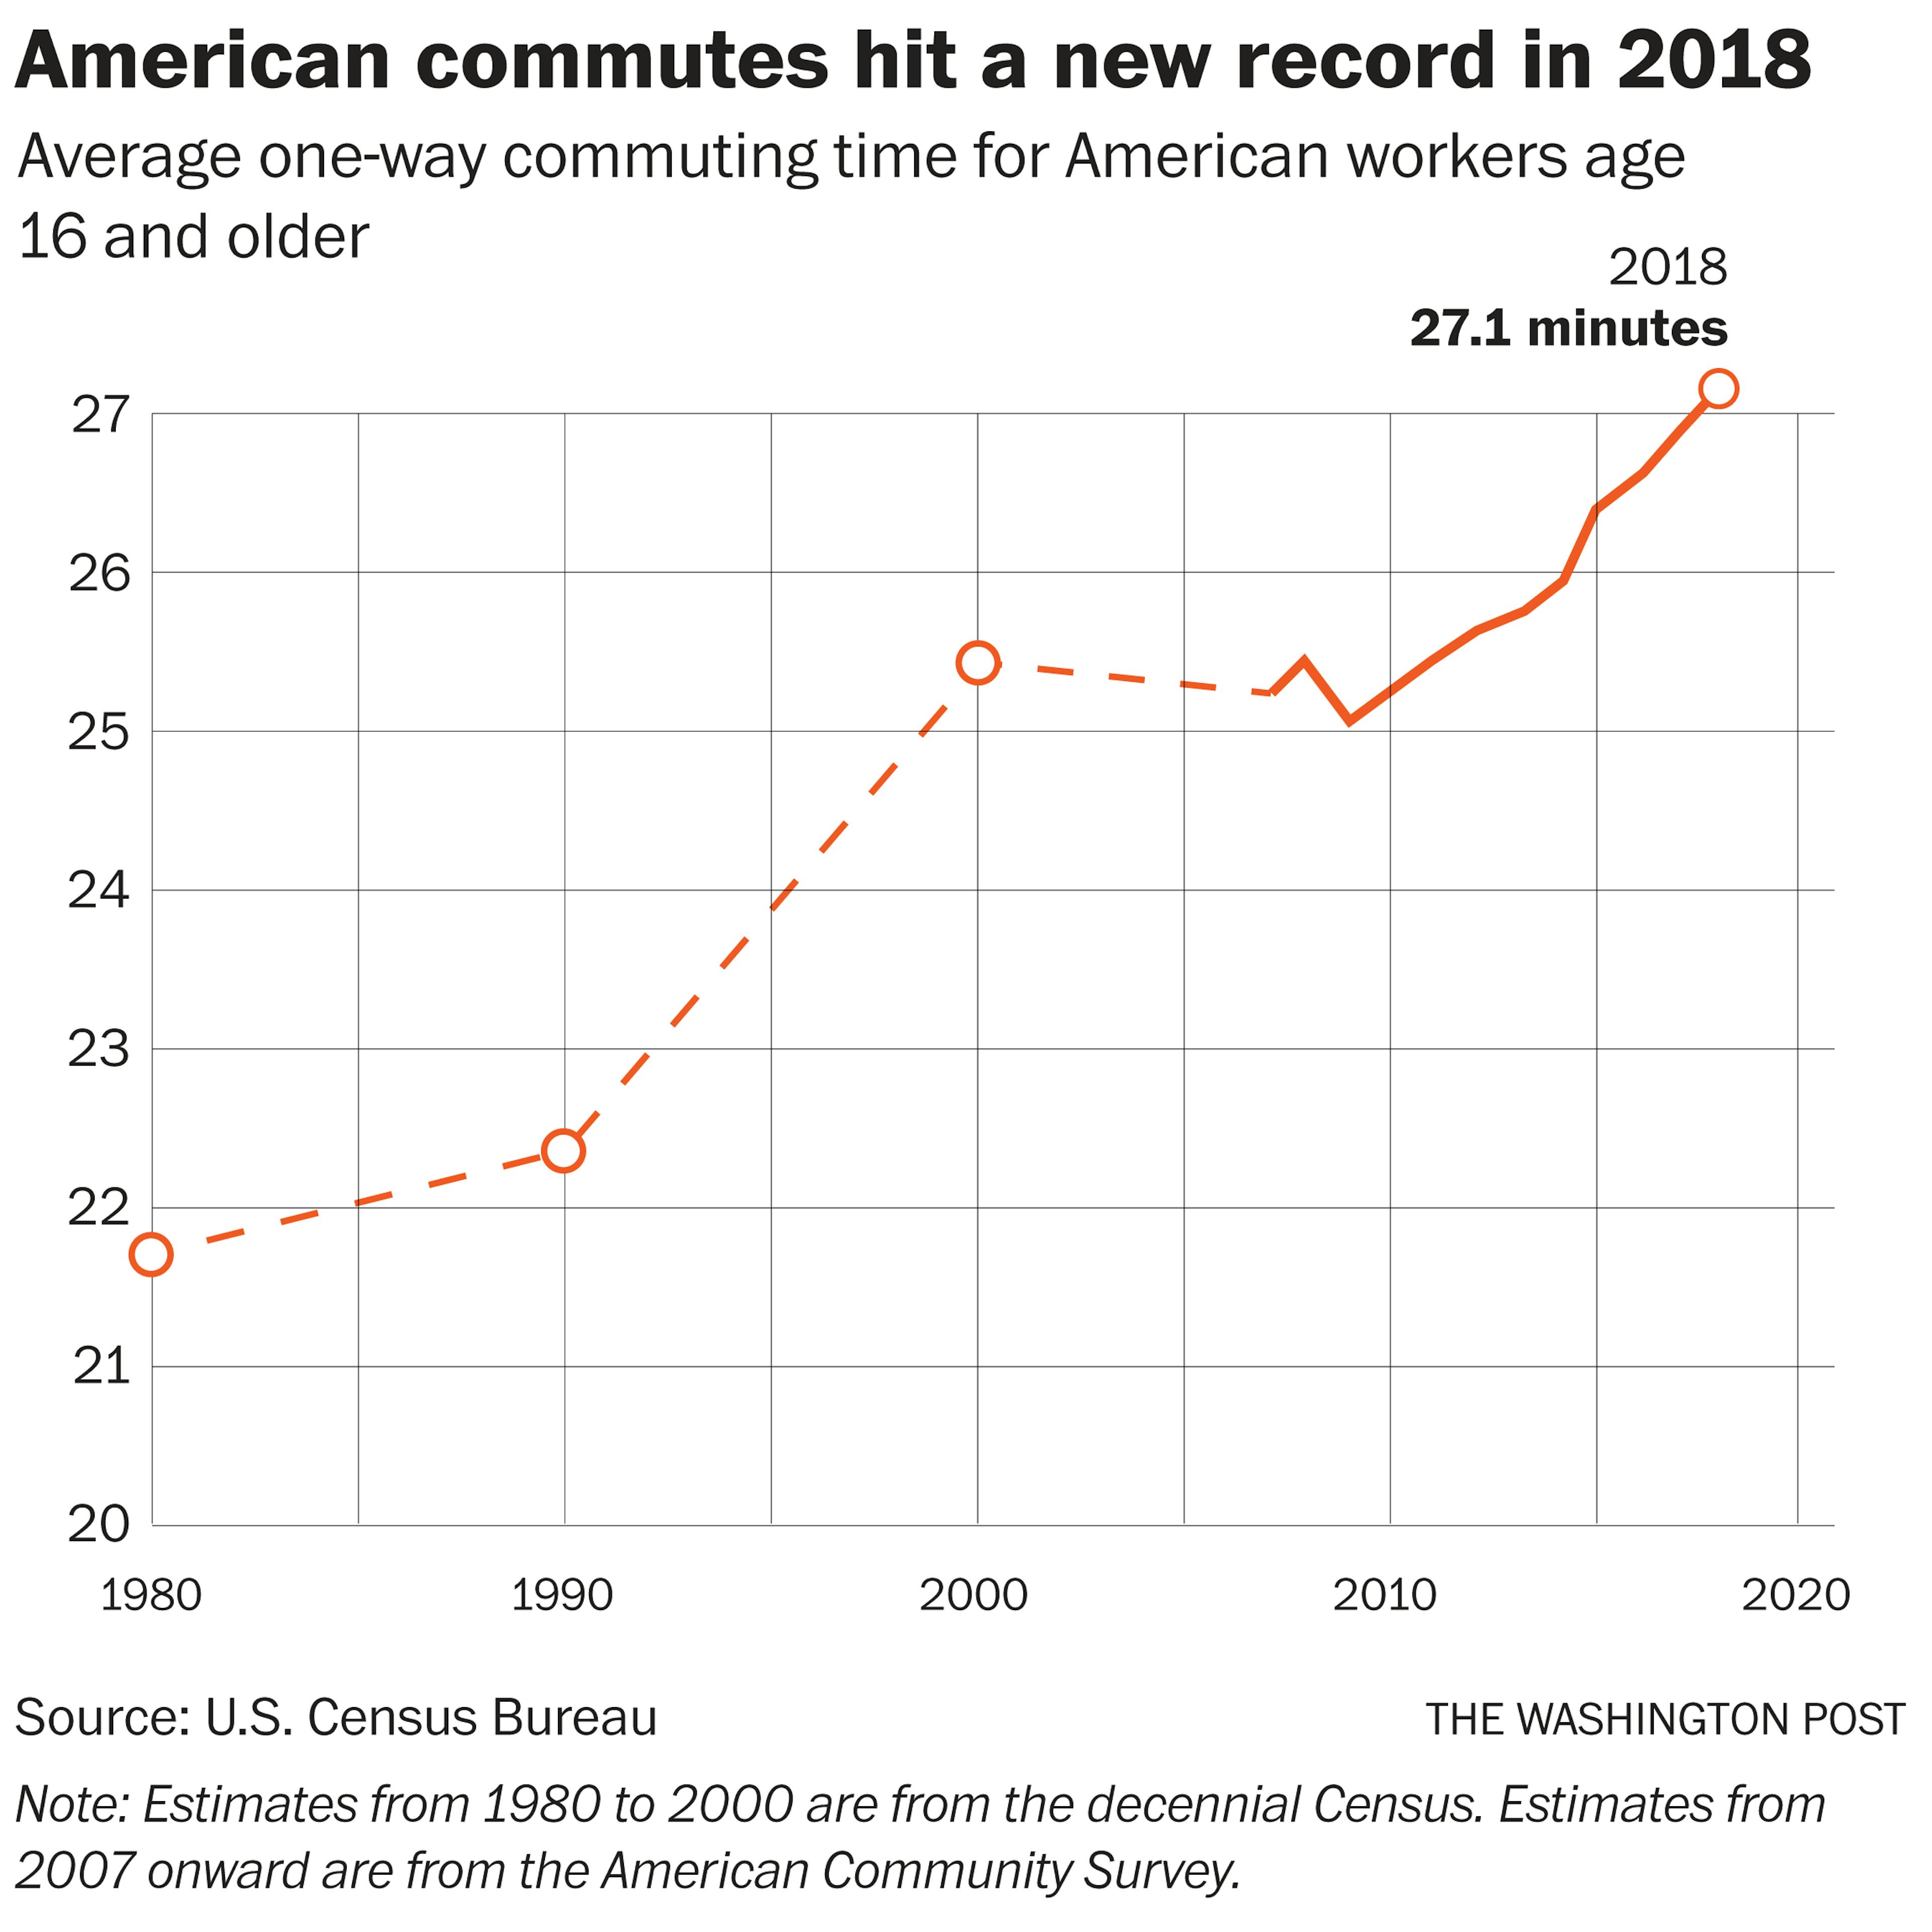 American commutes hit a new record in 2018